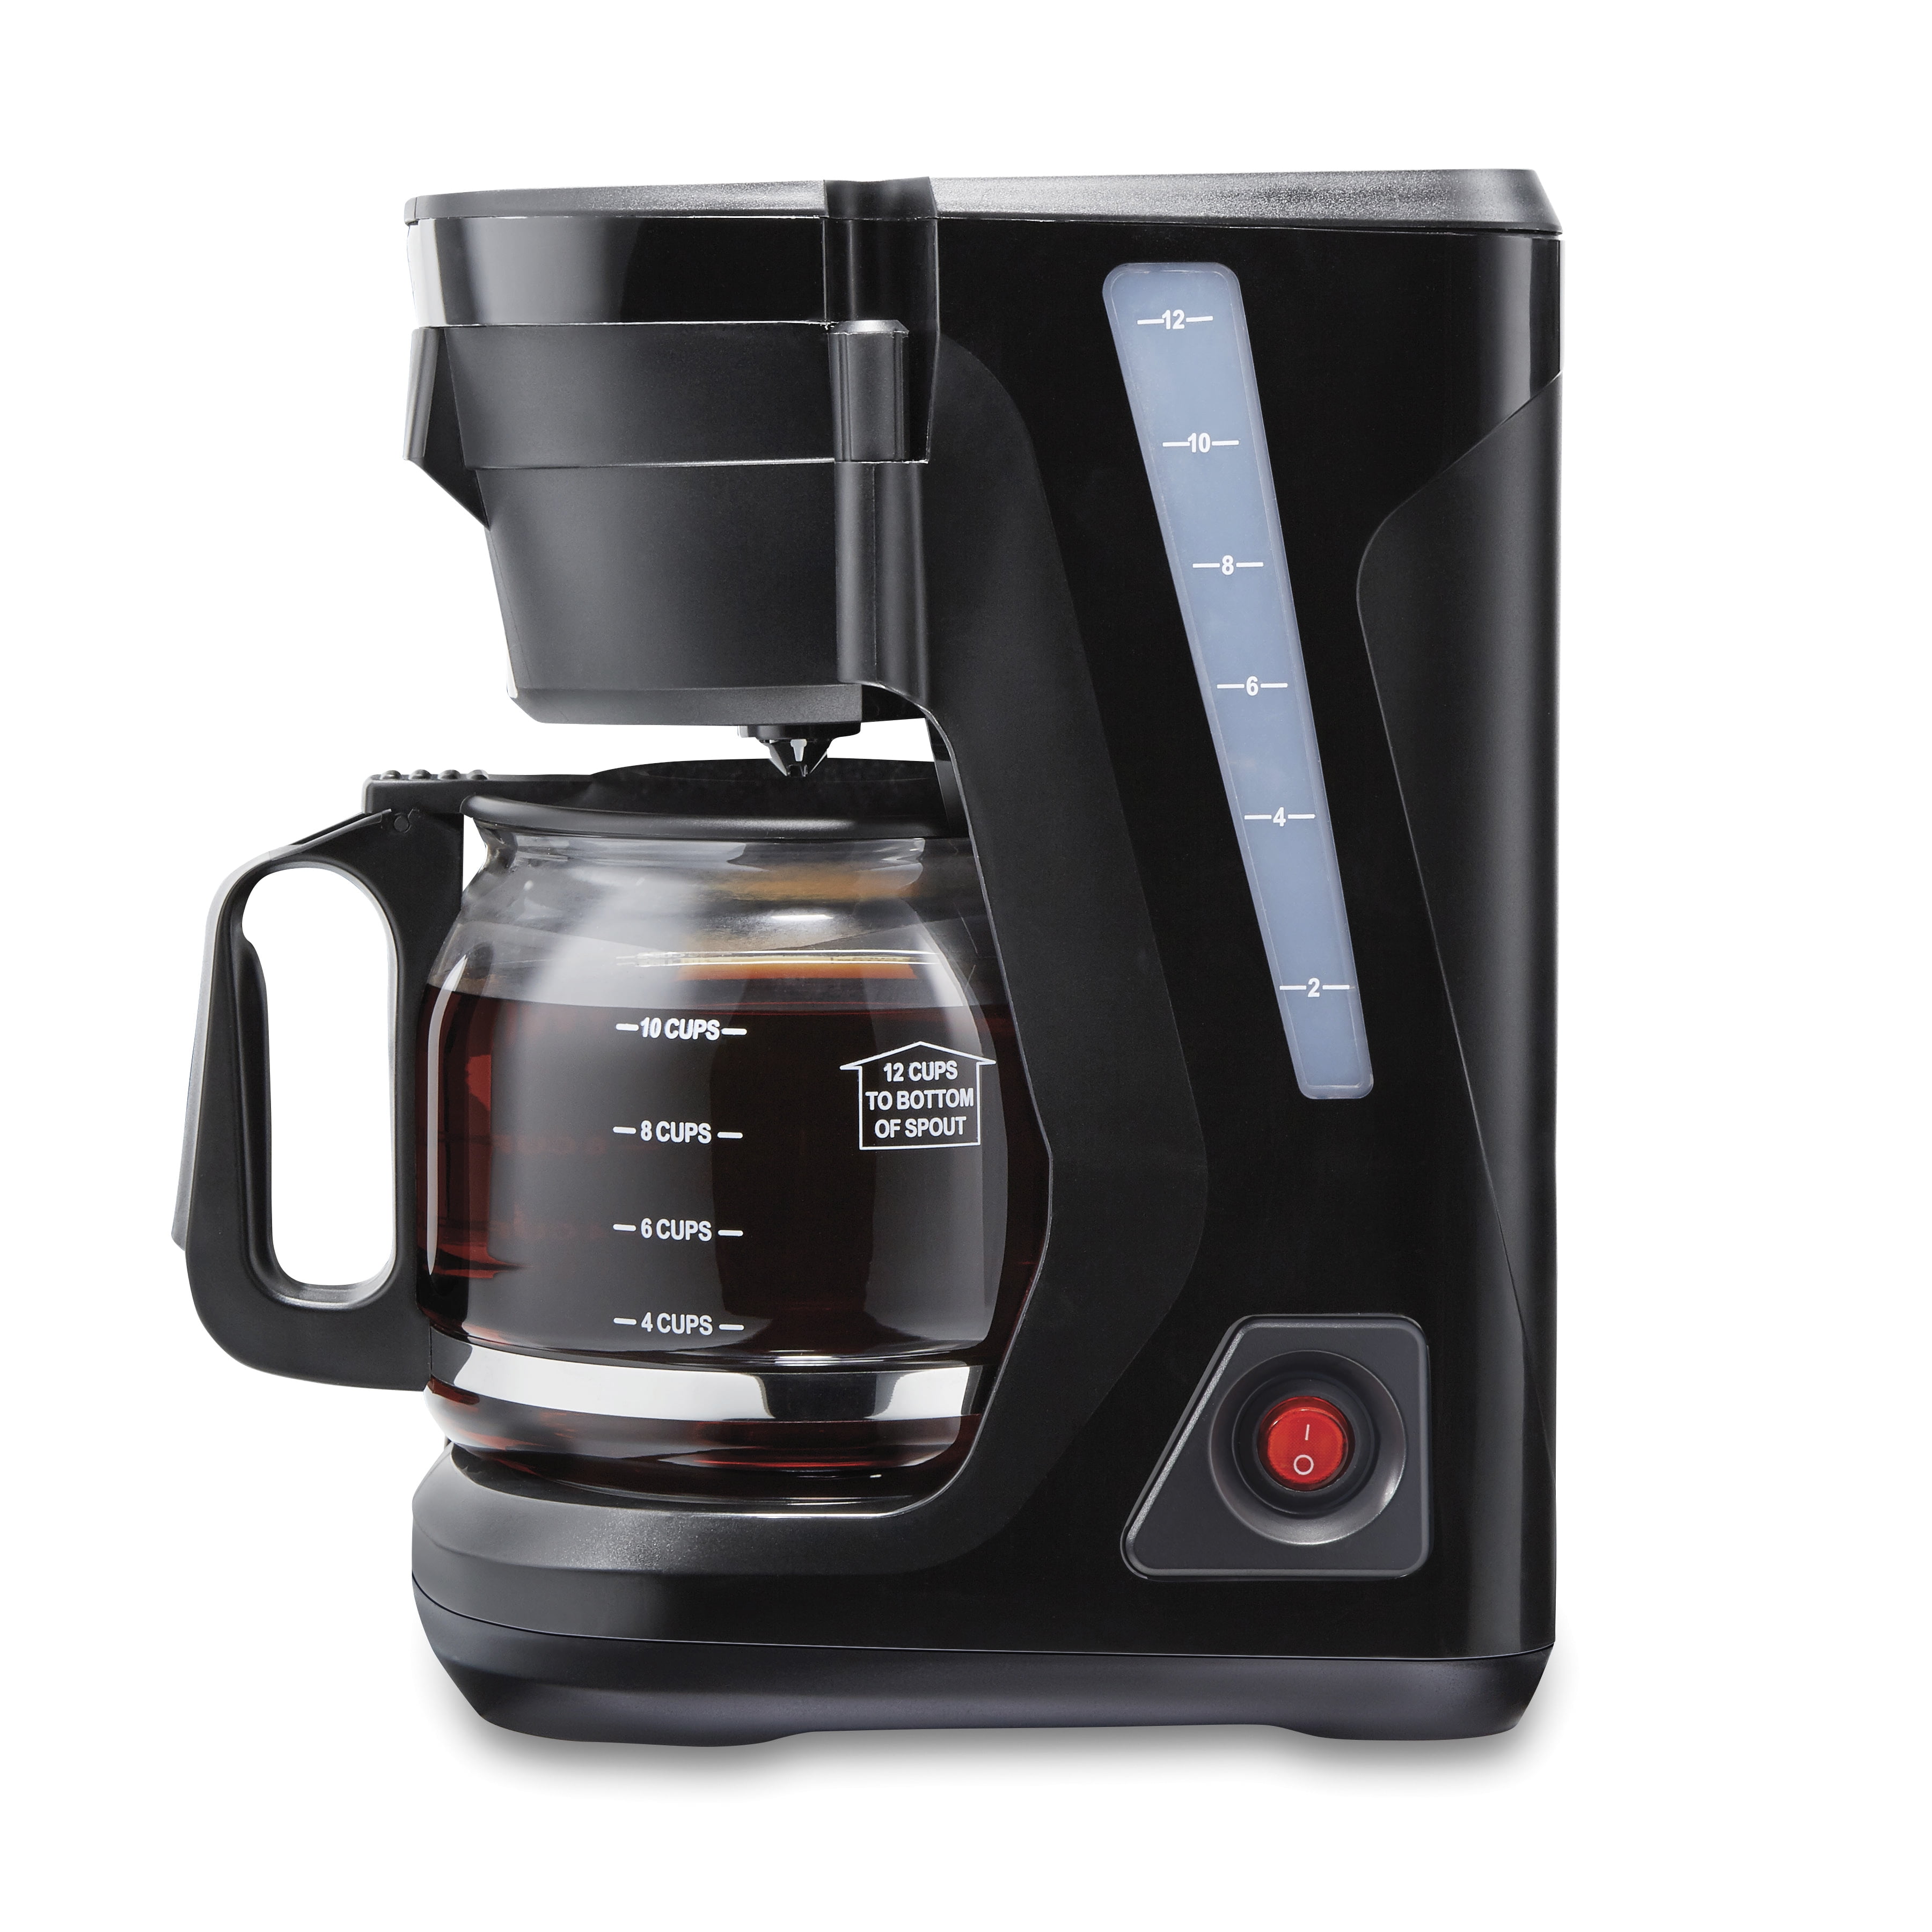 Proctor Silex 12-Cup Black Front Fill Compact Drip Coffee Maker